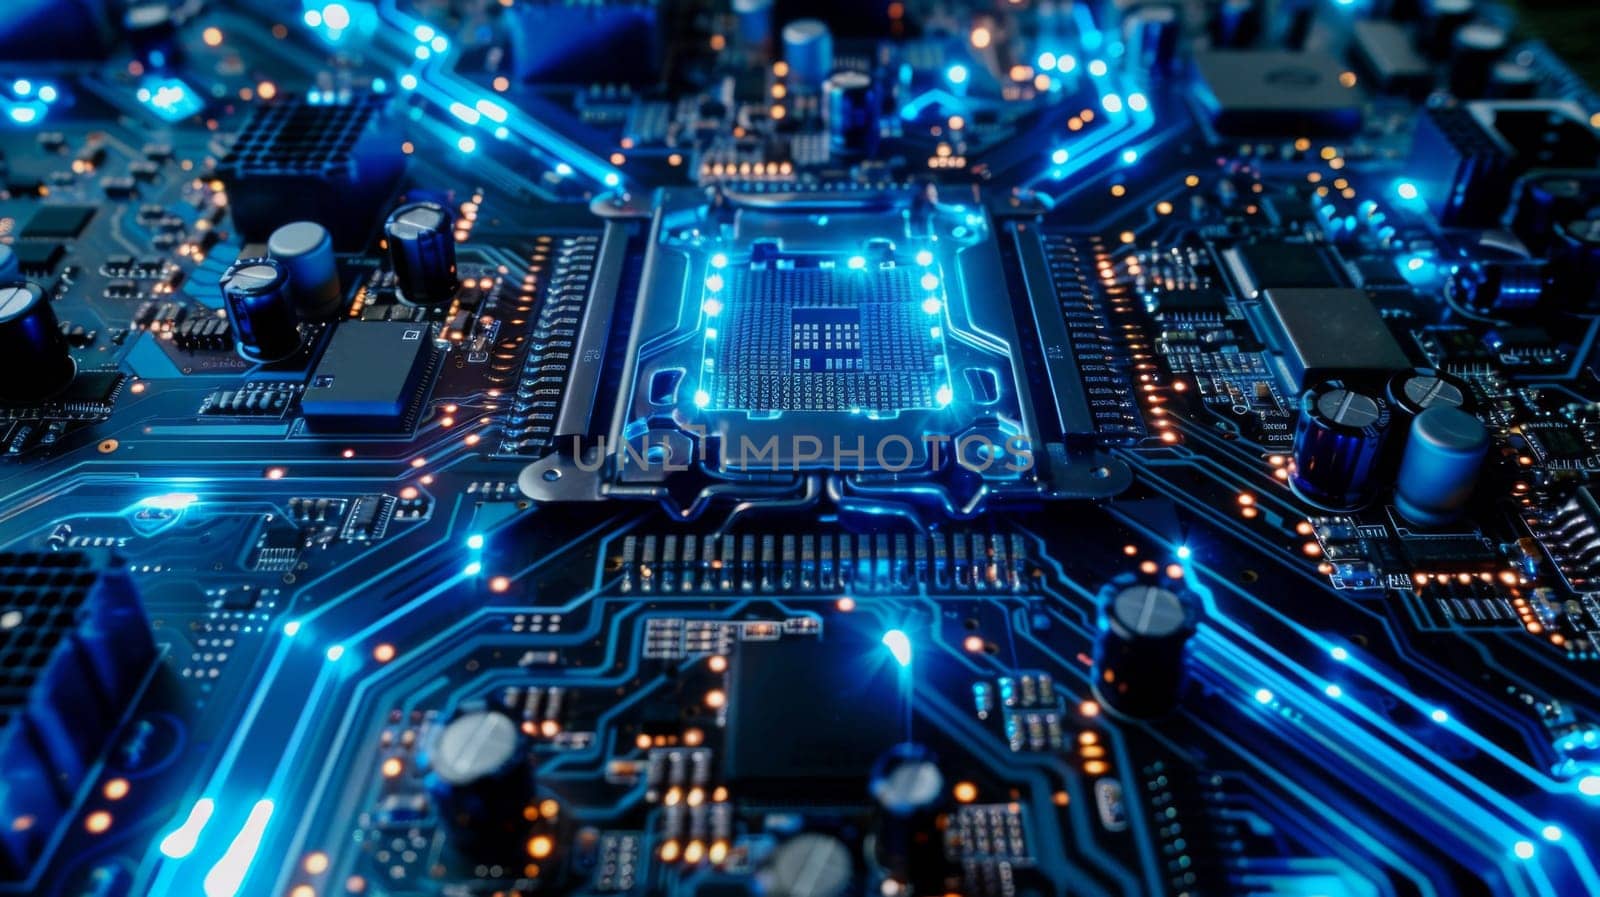 A close up of a computer motherboard with blue lights